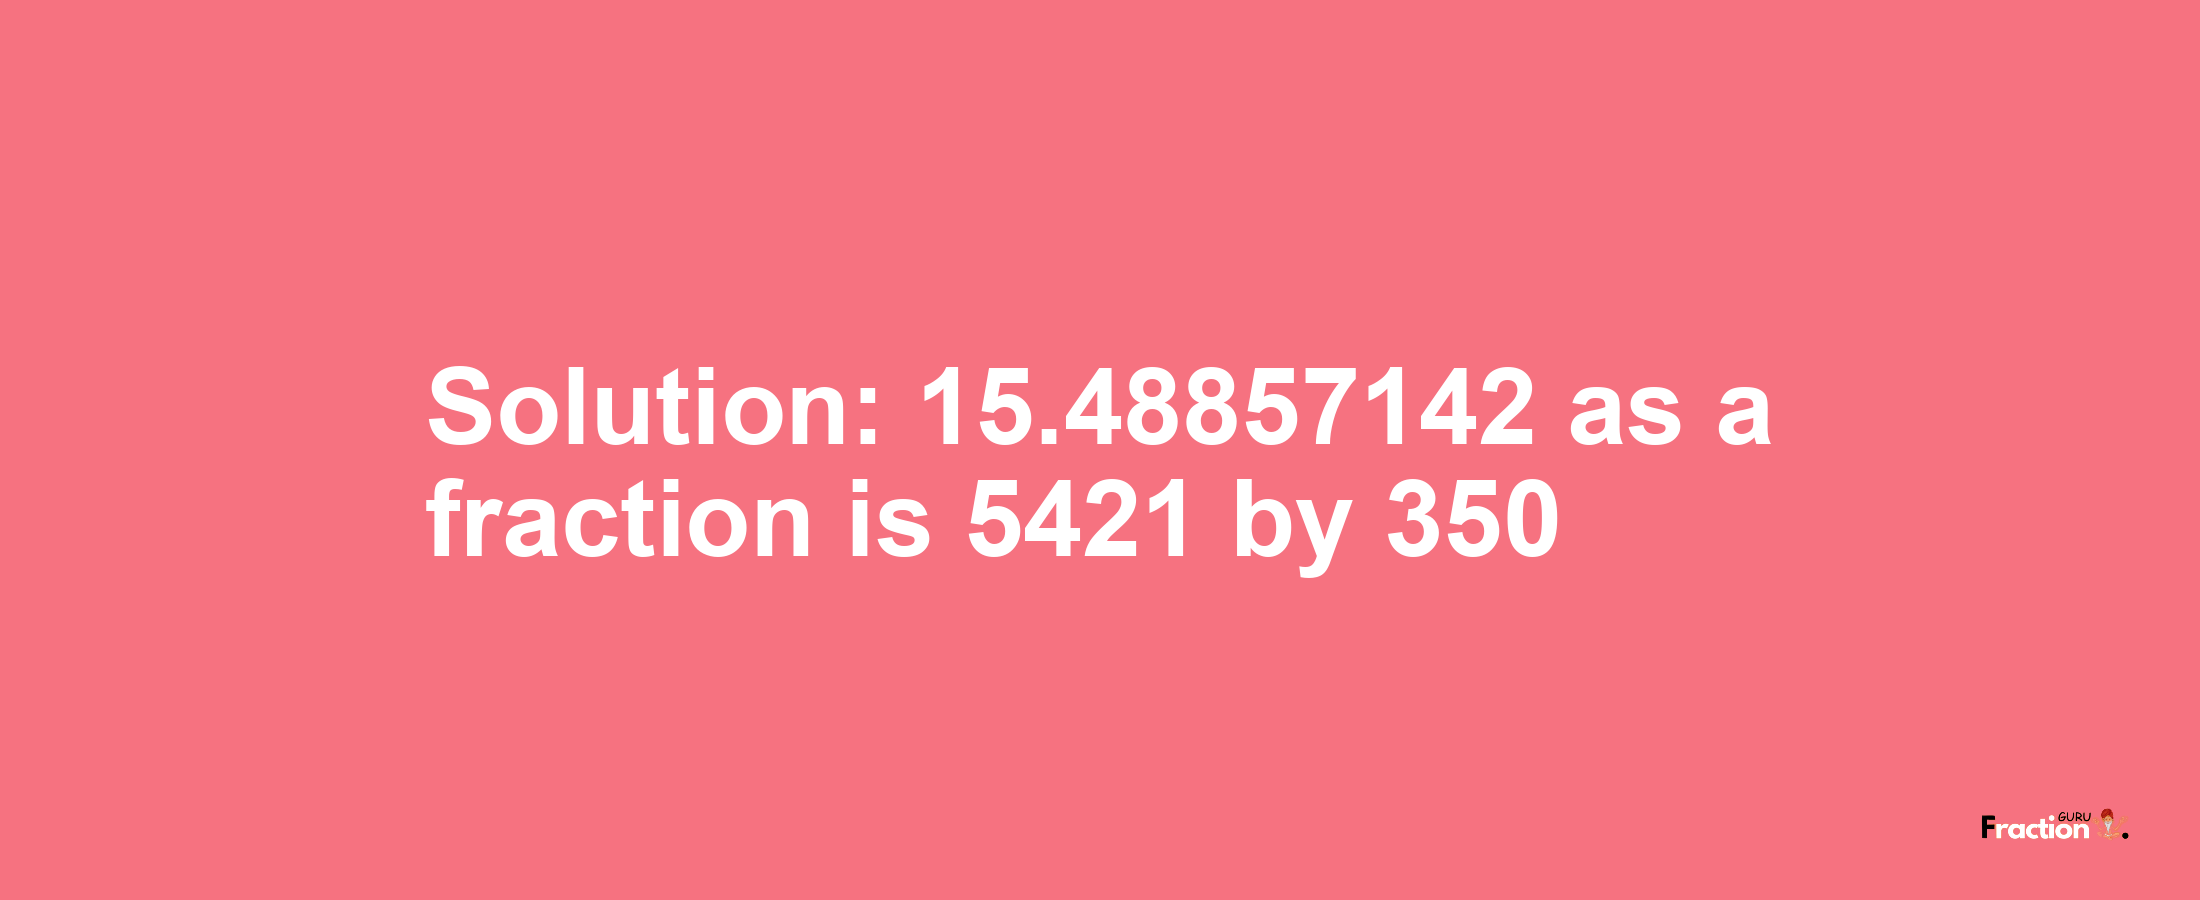 Solution:15.48857142 as a fraction is 5421/350